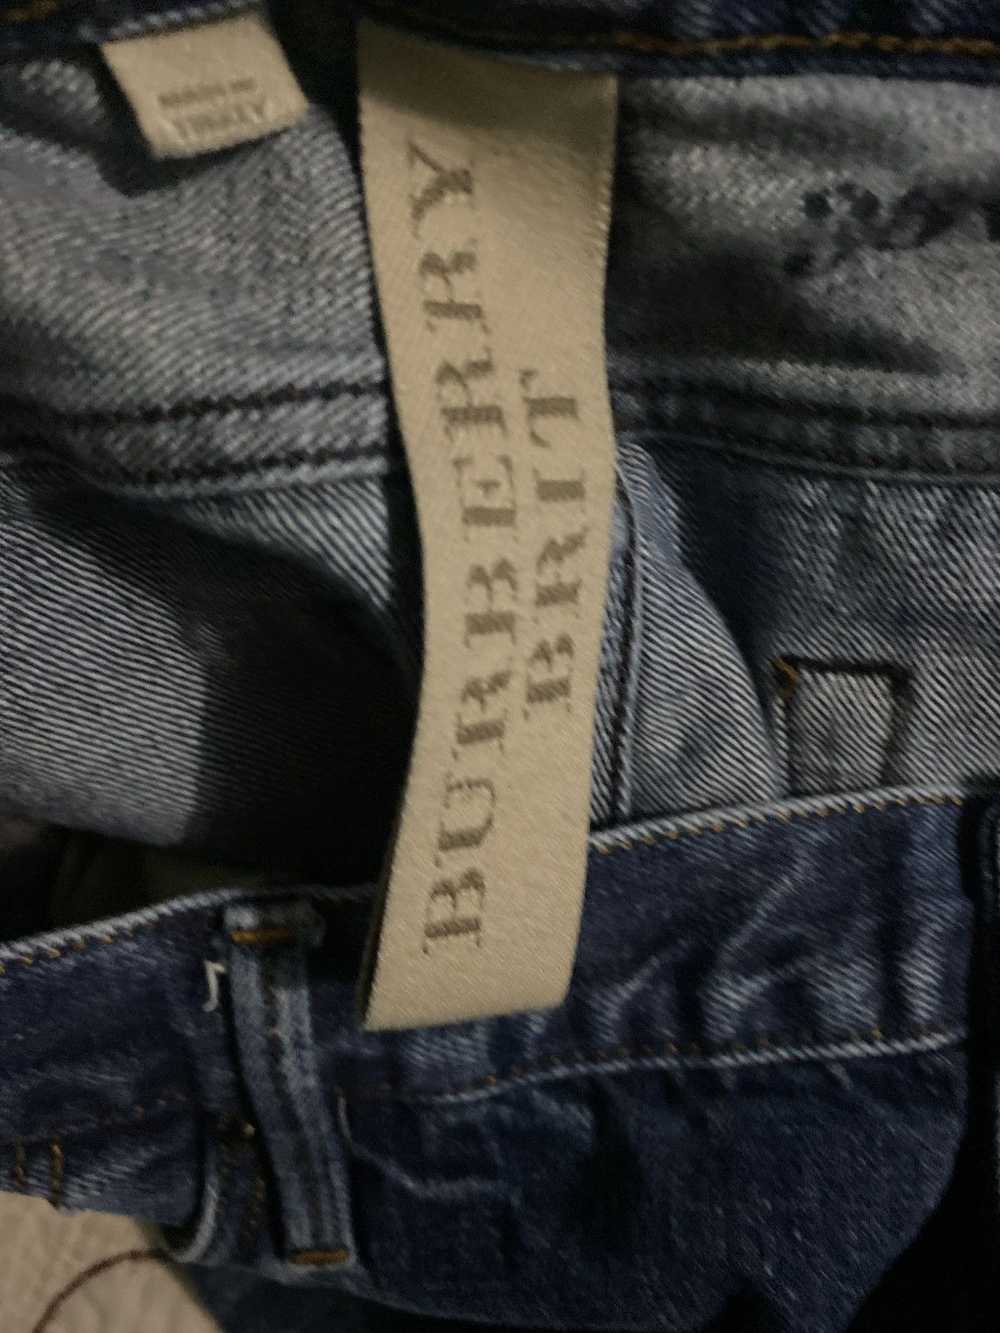 Burberry Burberry Brit jeans - image 3